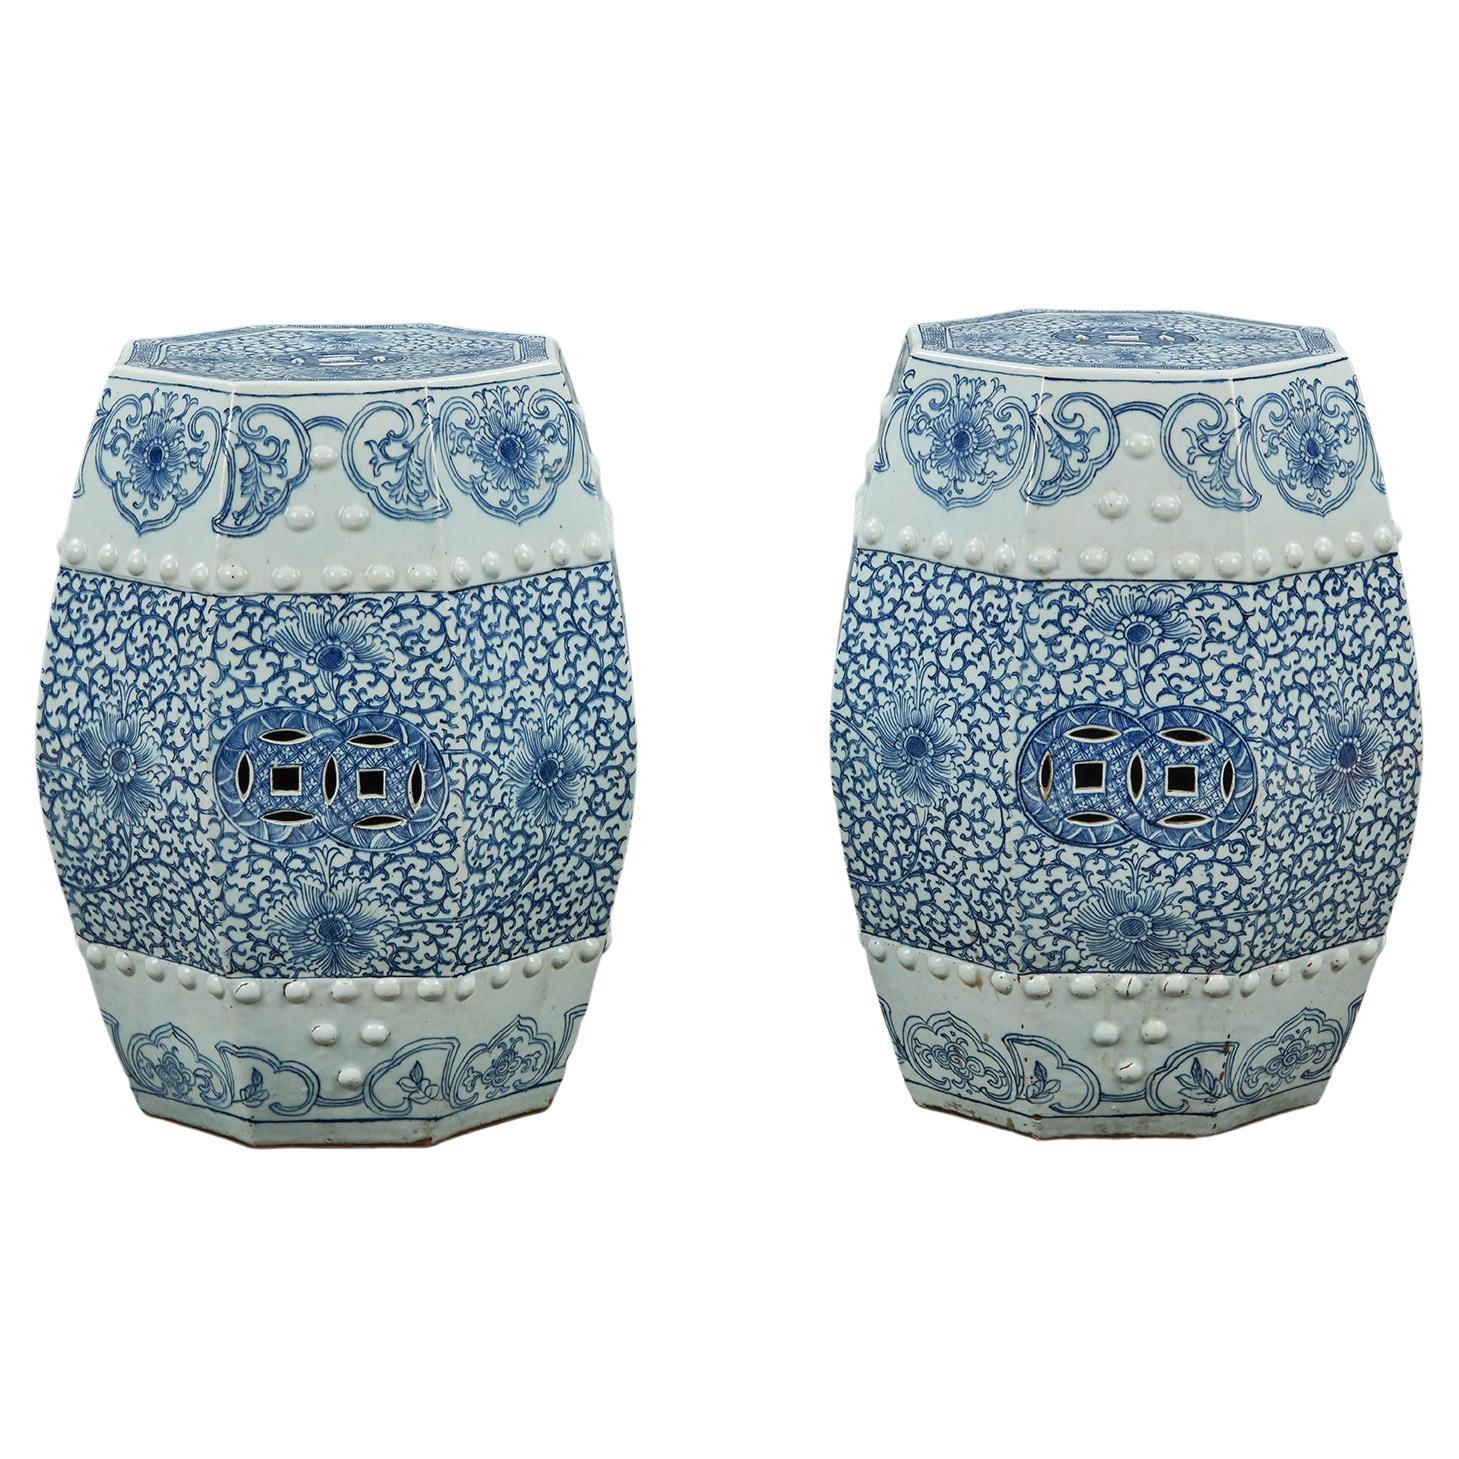 Pair of 19th Century Octagonal Chinese Blue and White Porcelain Garden Seats For Sale